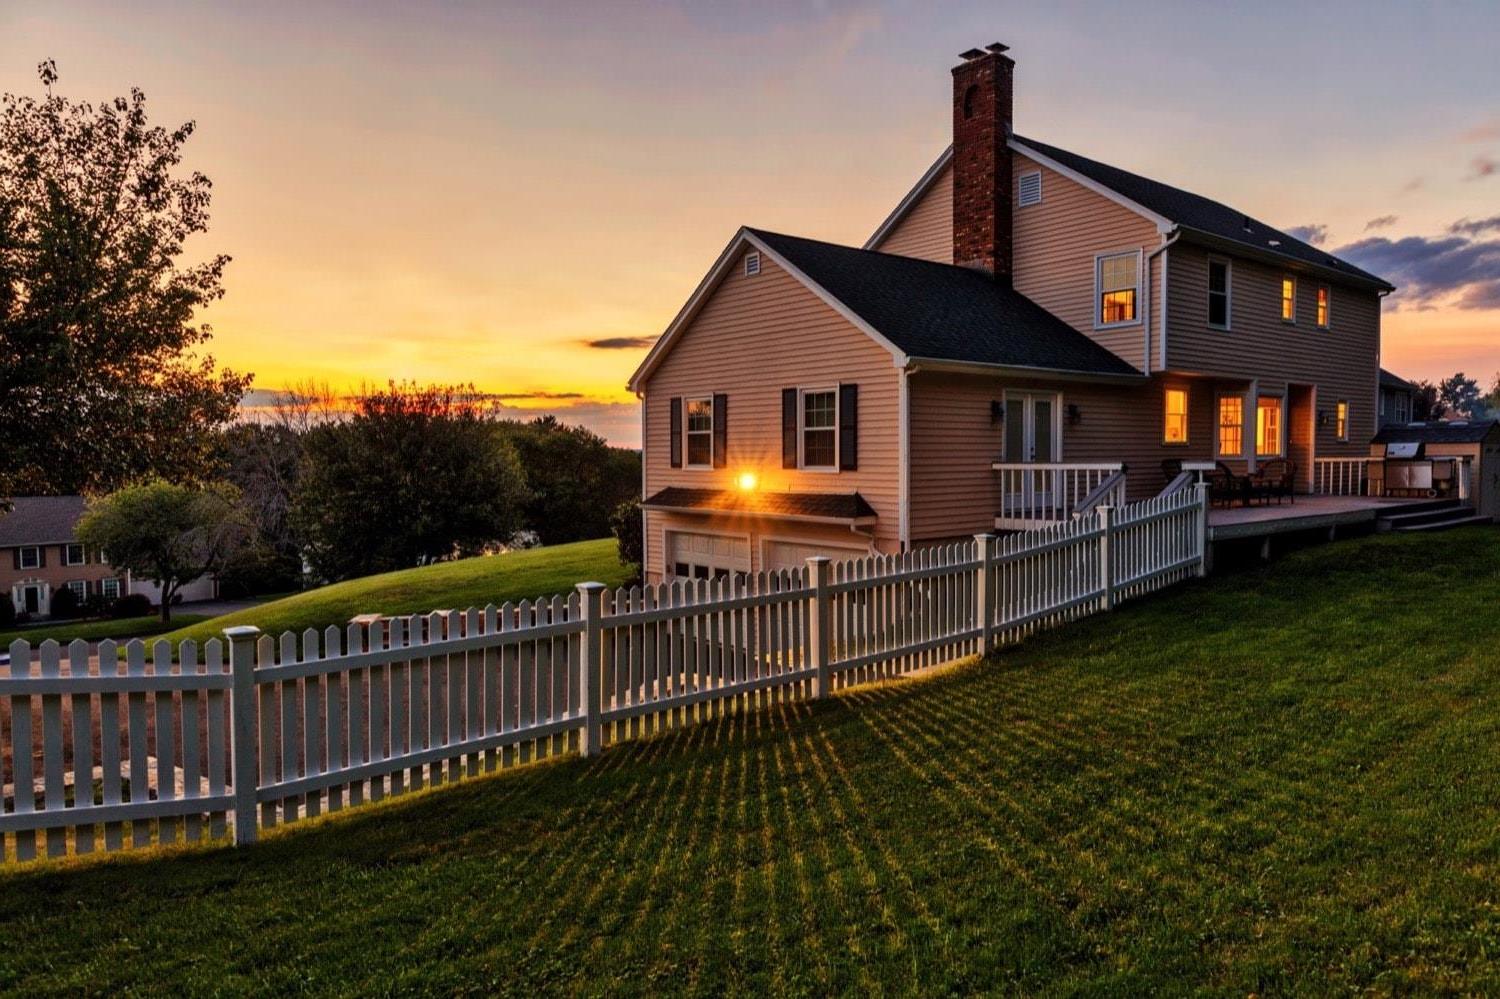 The back of a house with a back porch, BBQ, and white picket fence, at sunset.